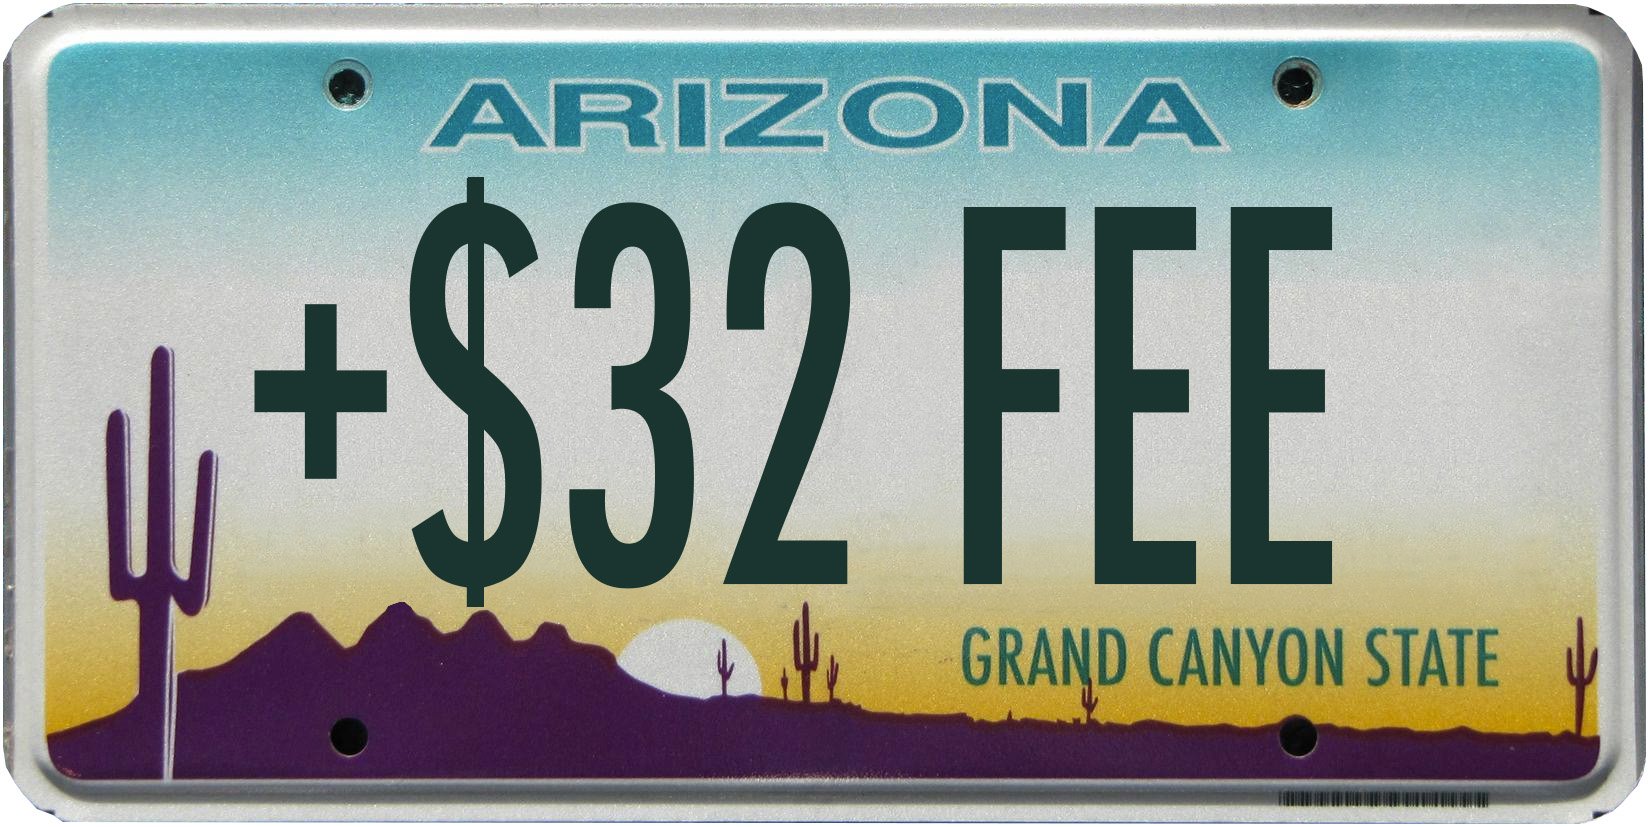 Vehicle registration fee to increase $32